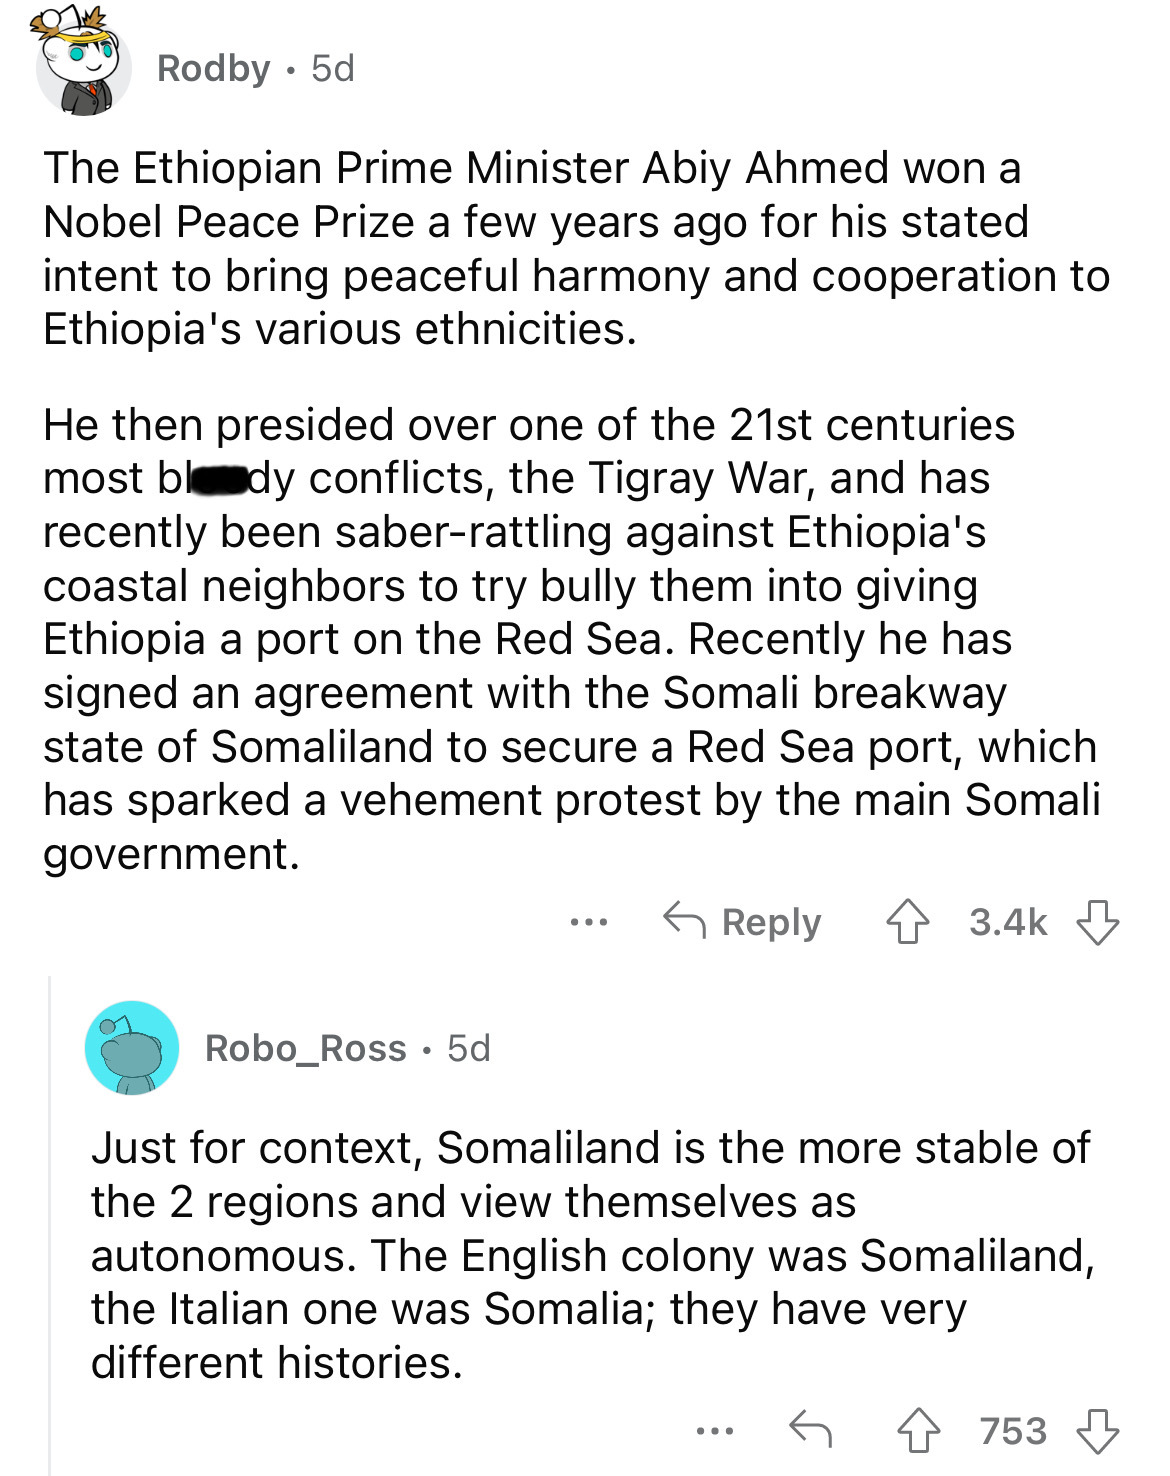 document - Rodby 5d The Ethiopian Prime Minister Abiy Ahmed won a Nobel Peace Prize a few years ago for his stated intent to bring peaceful harmony and cooperation to Ethiopia's various ethnicities. He then presided over one of the 21st centuries most bld